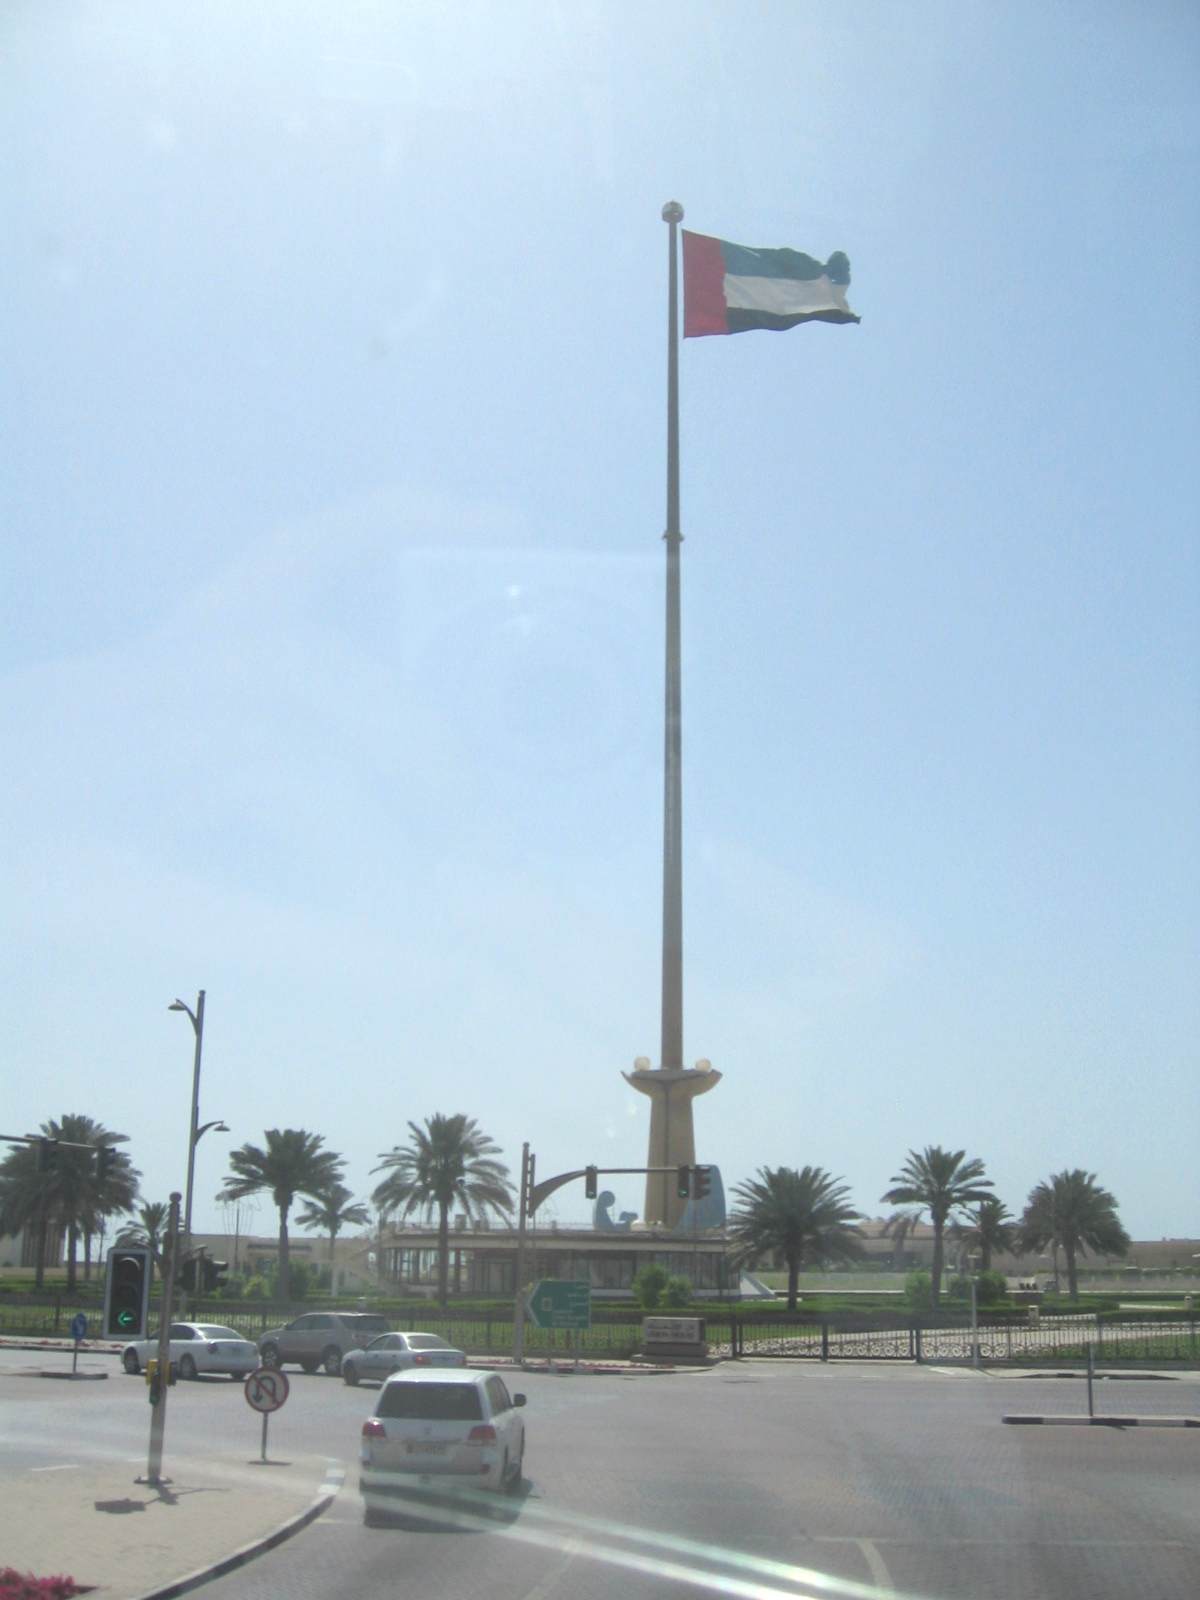 Largest flag pole in the world